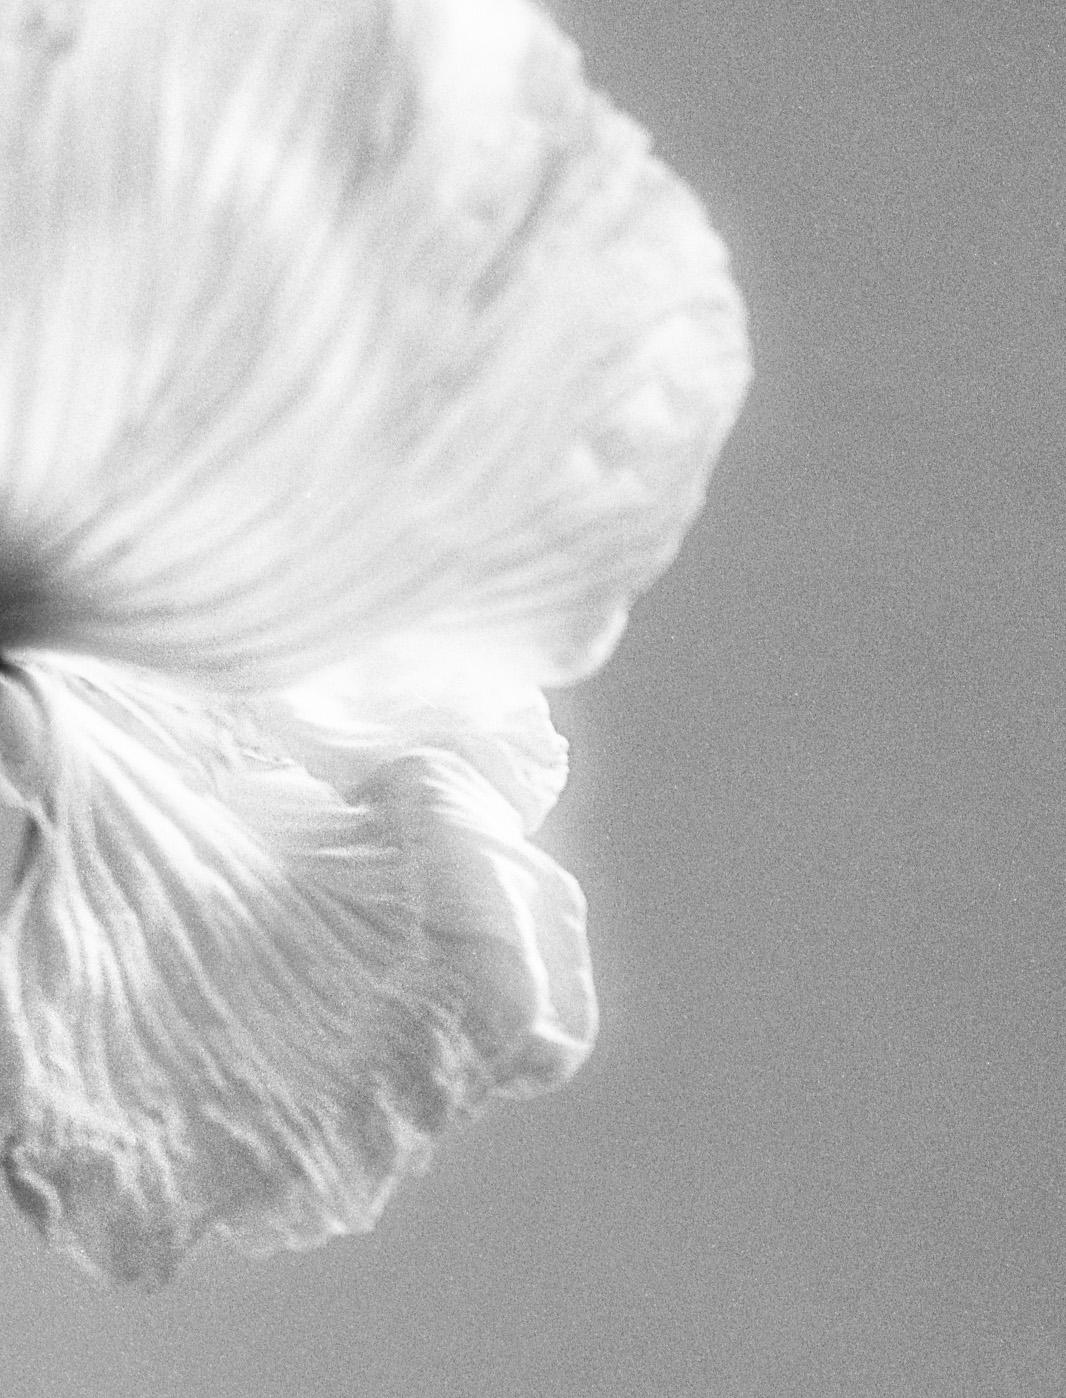 Poppy No.3 - Analogue black and white floral photography, Limited edition of 10. - Photograph by Ugne Pouwell